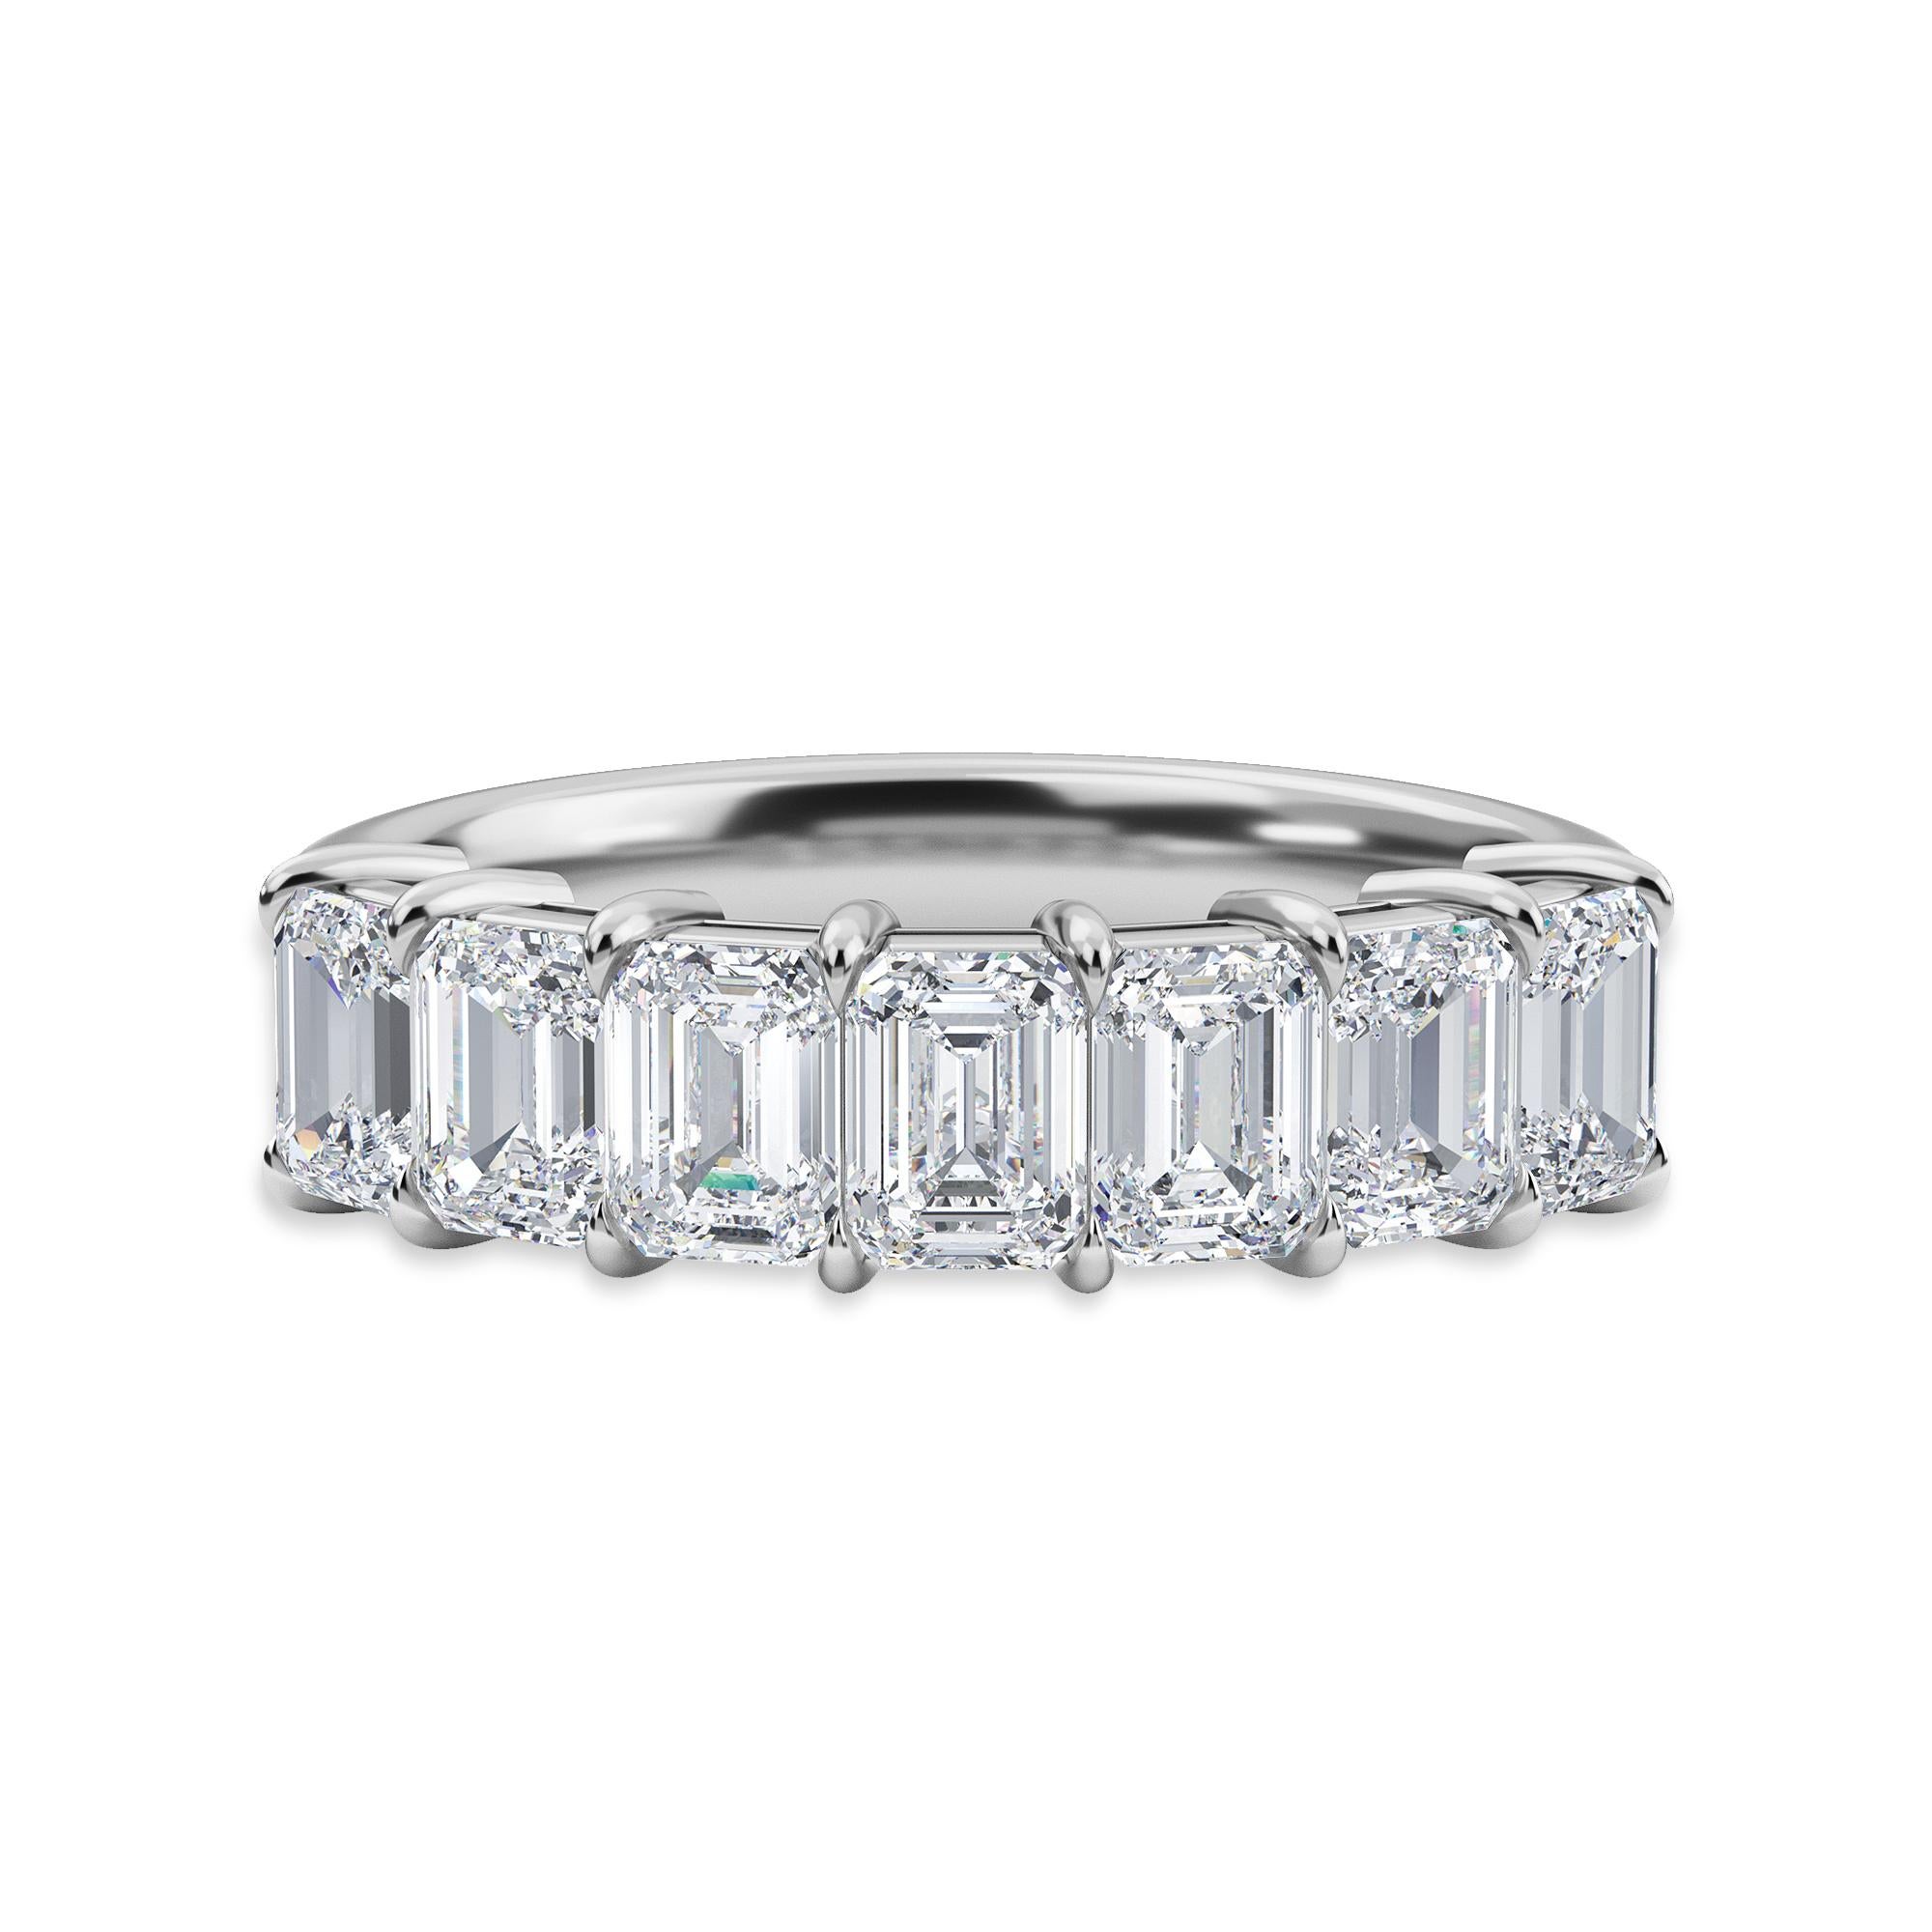 This partway band has 7 Emerald cut diamonds with a total carat of 2.16.
The diamonds are I color VS clarity. The ring is a finger size 6.5 and is set in platinum.